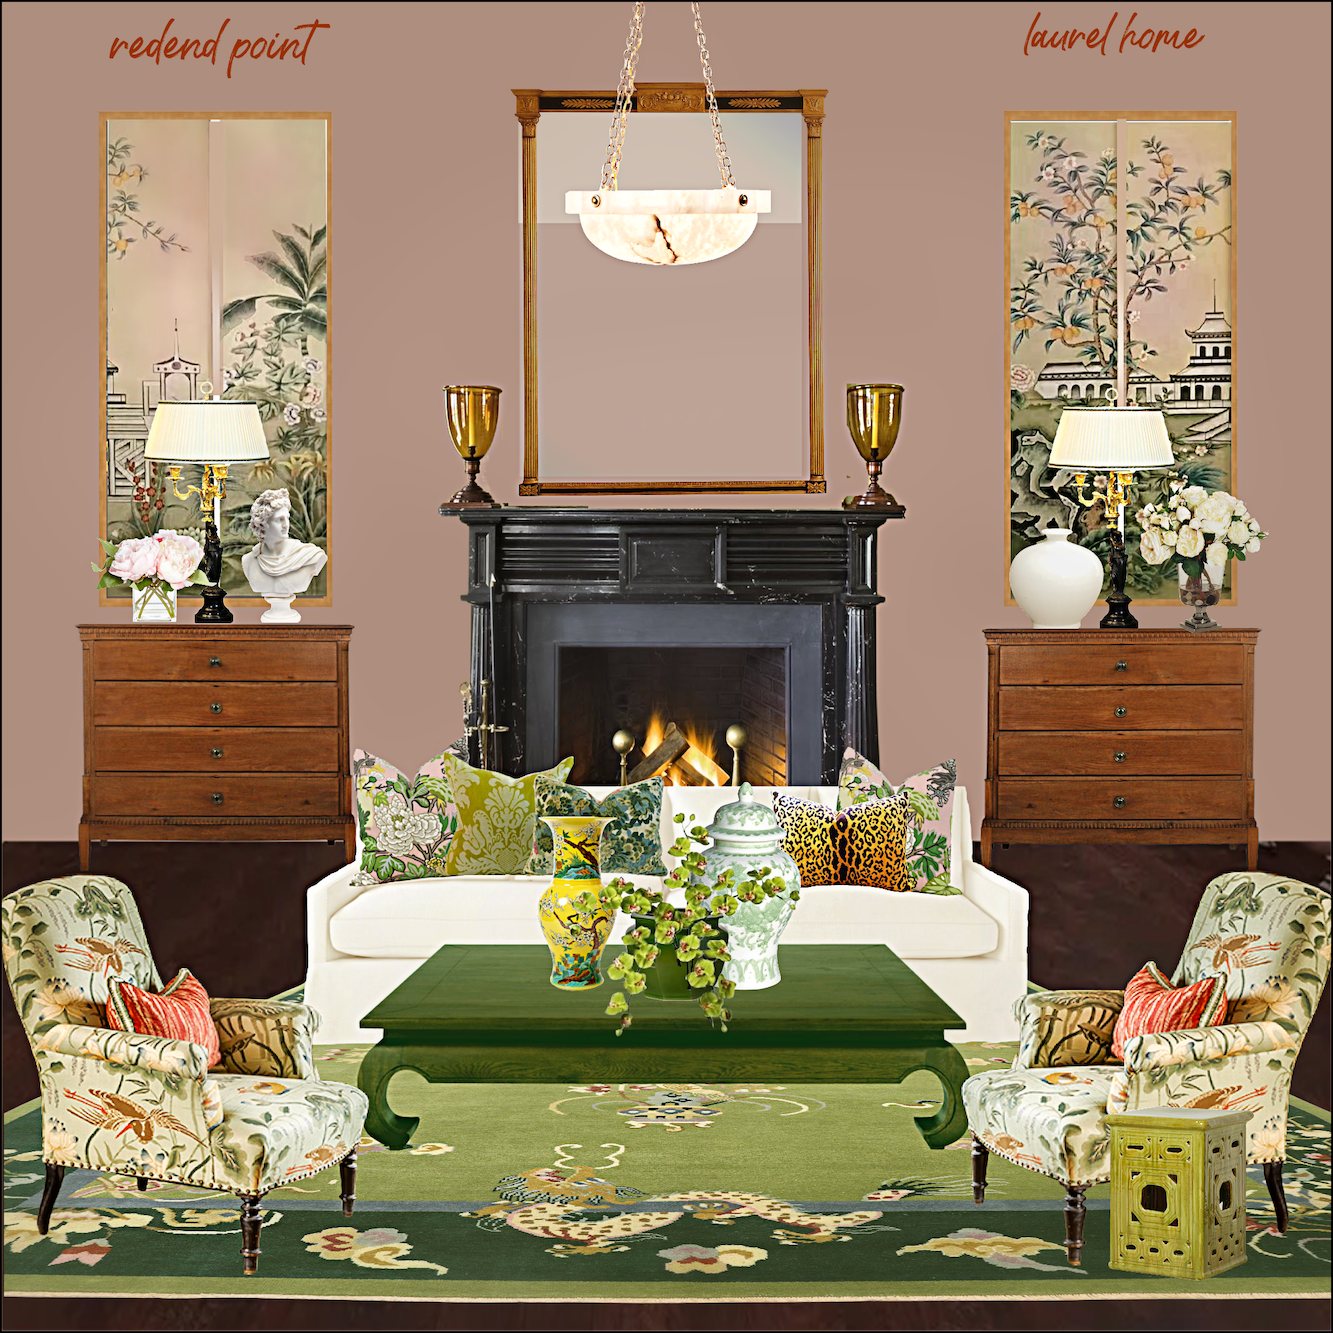 rendend point walls - horrible wall color - Chinese Rug - pale pink Serena & Lily sofa